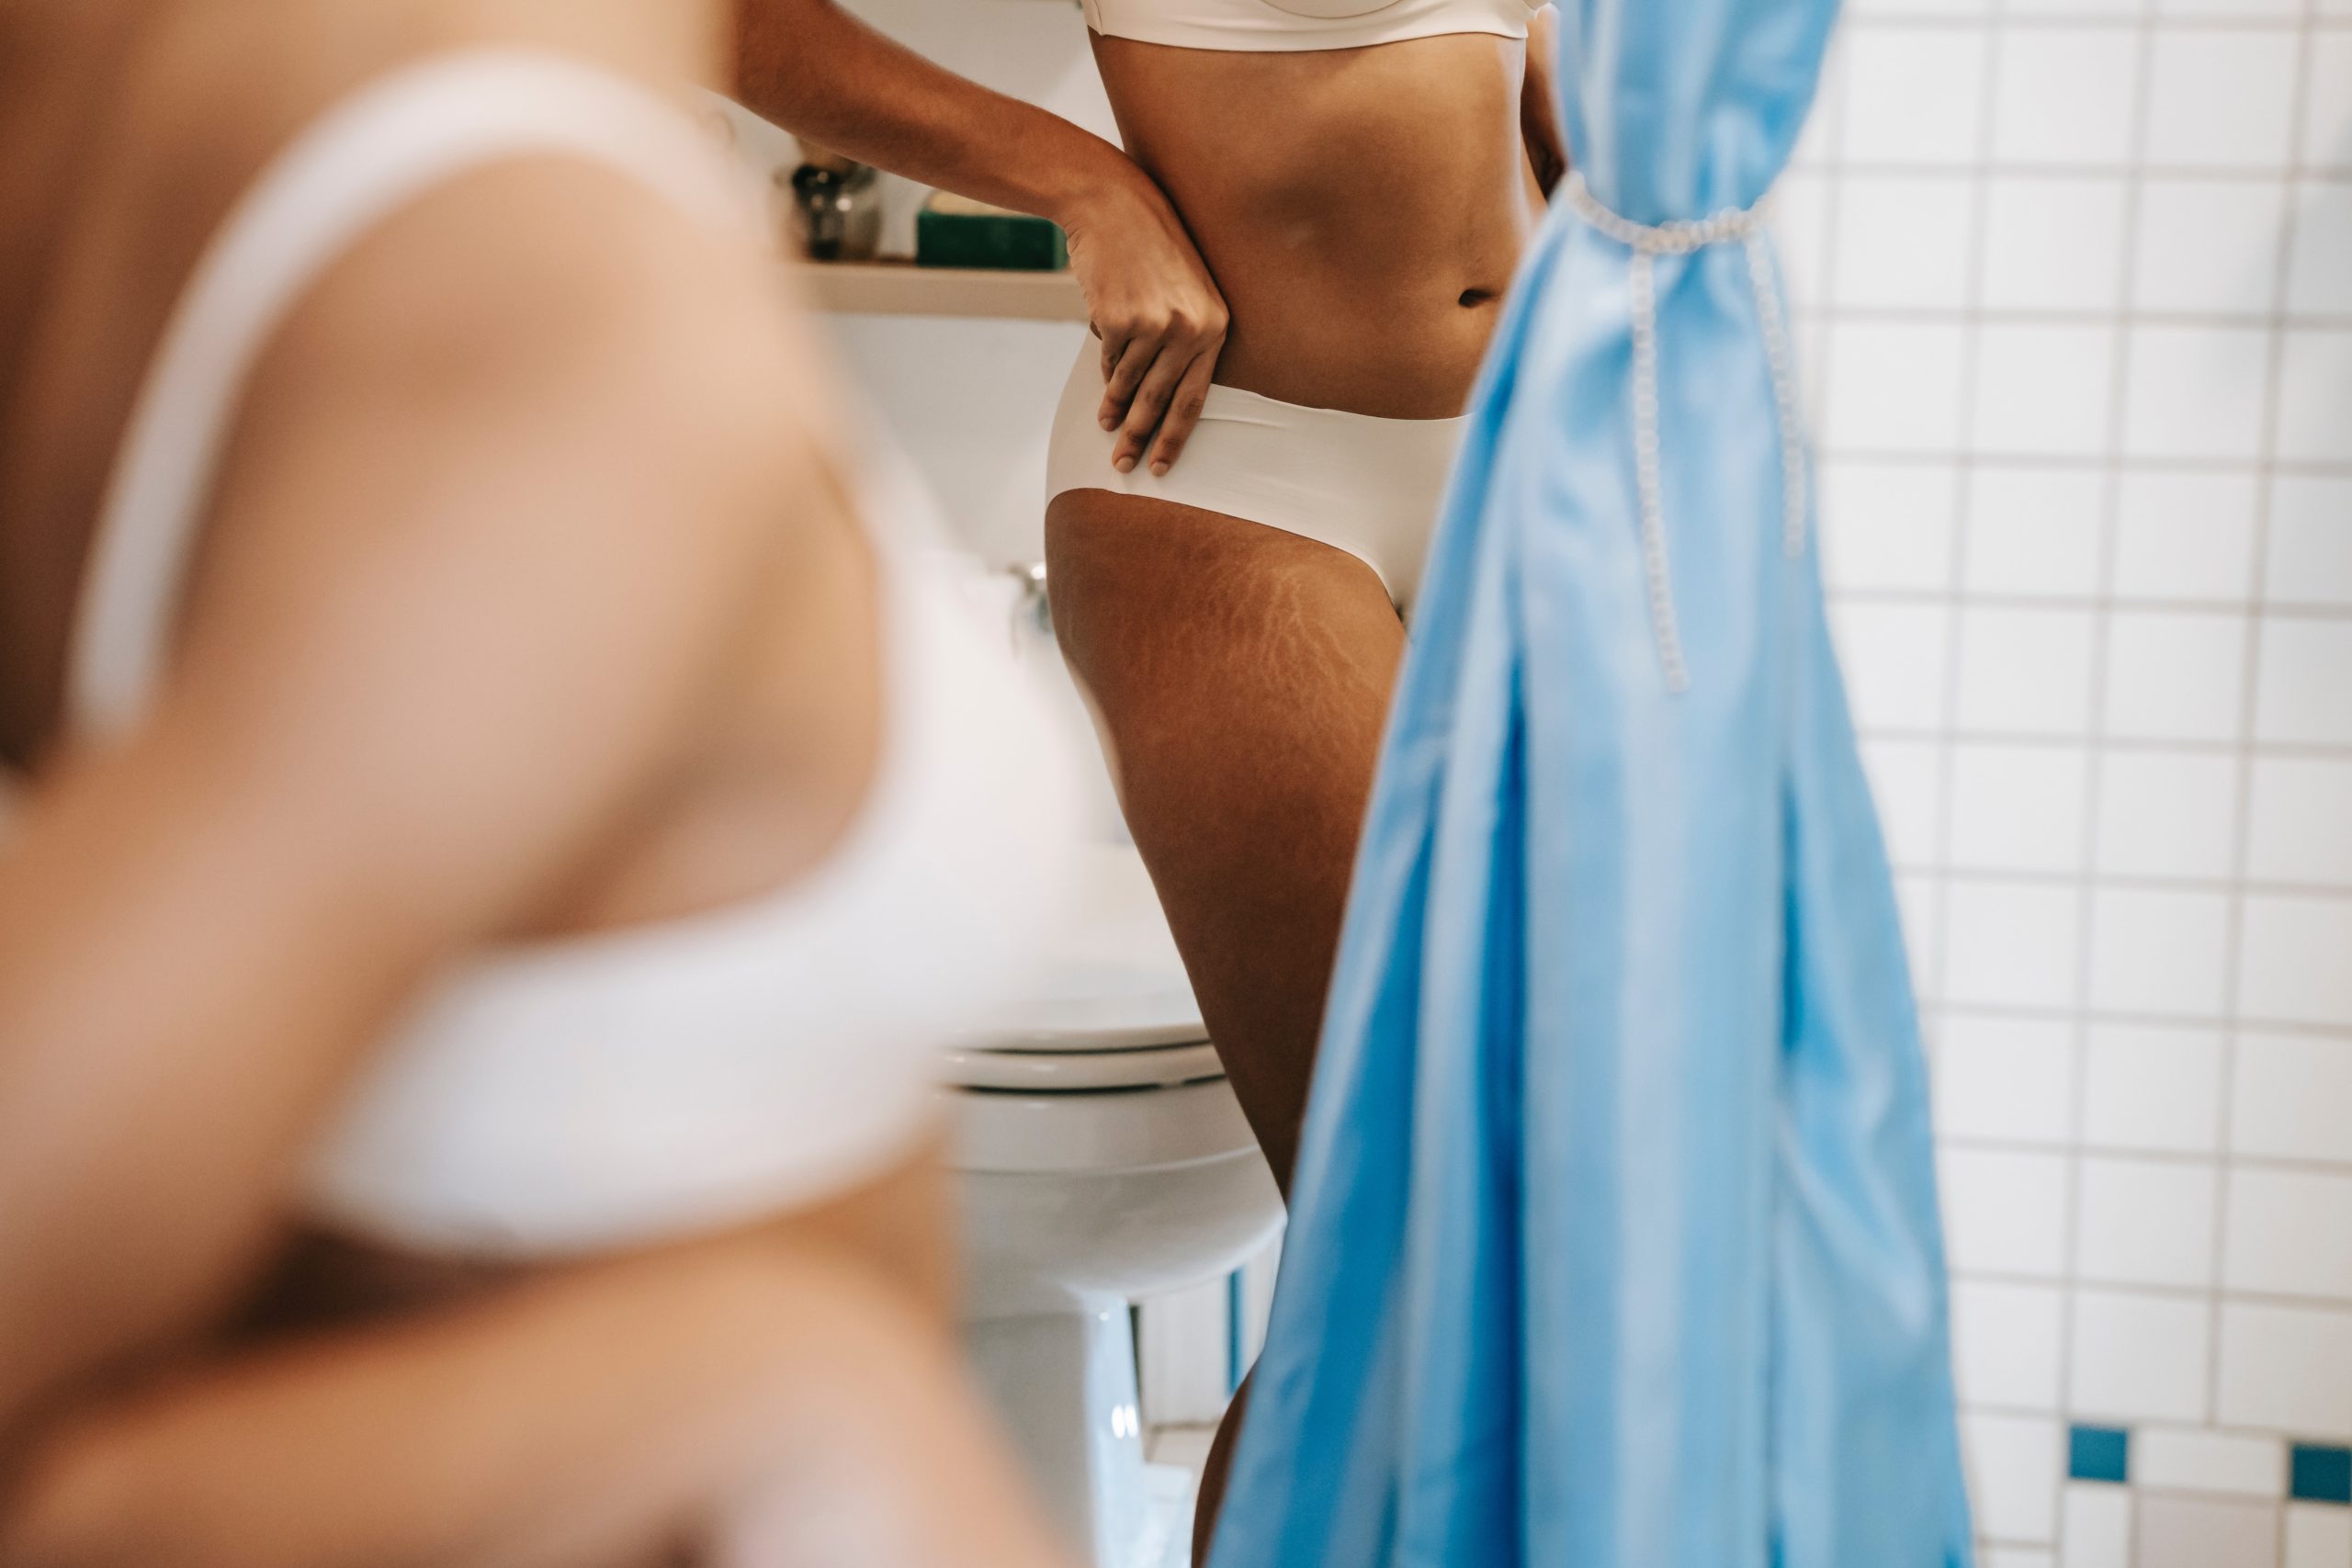 Woman looking at her stretch marks in a bathroom mirror